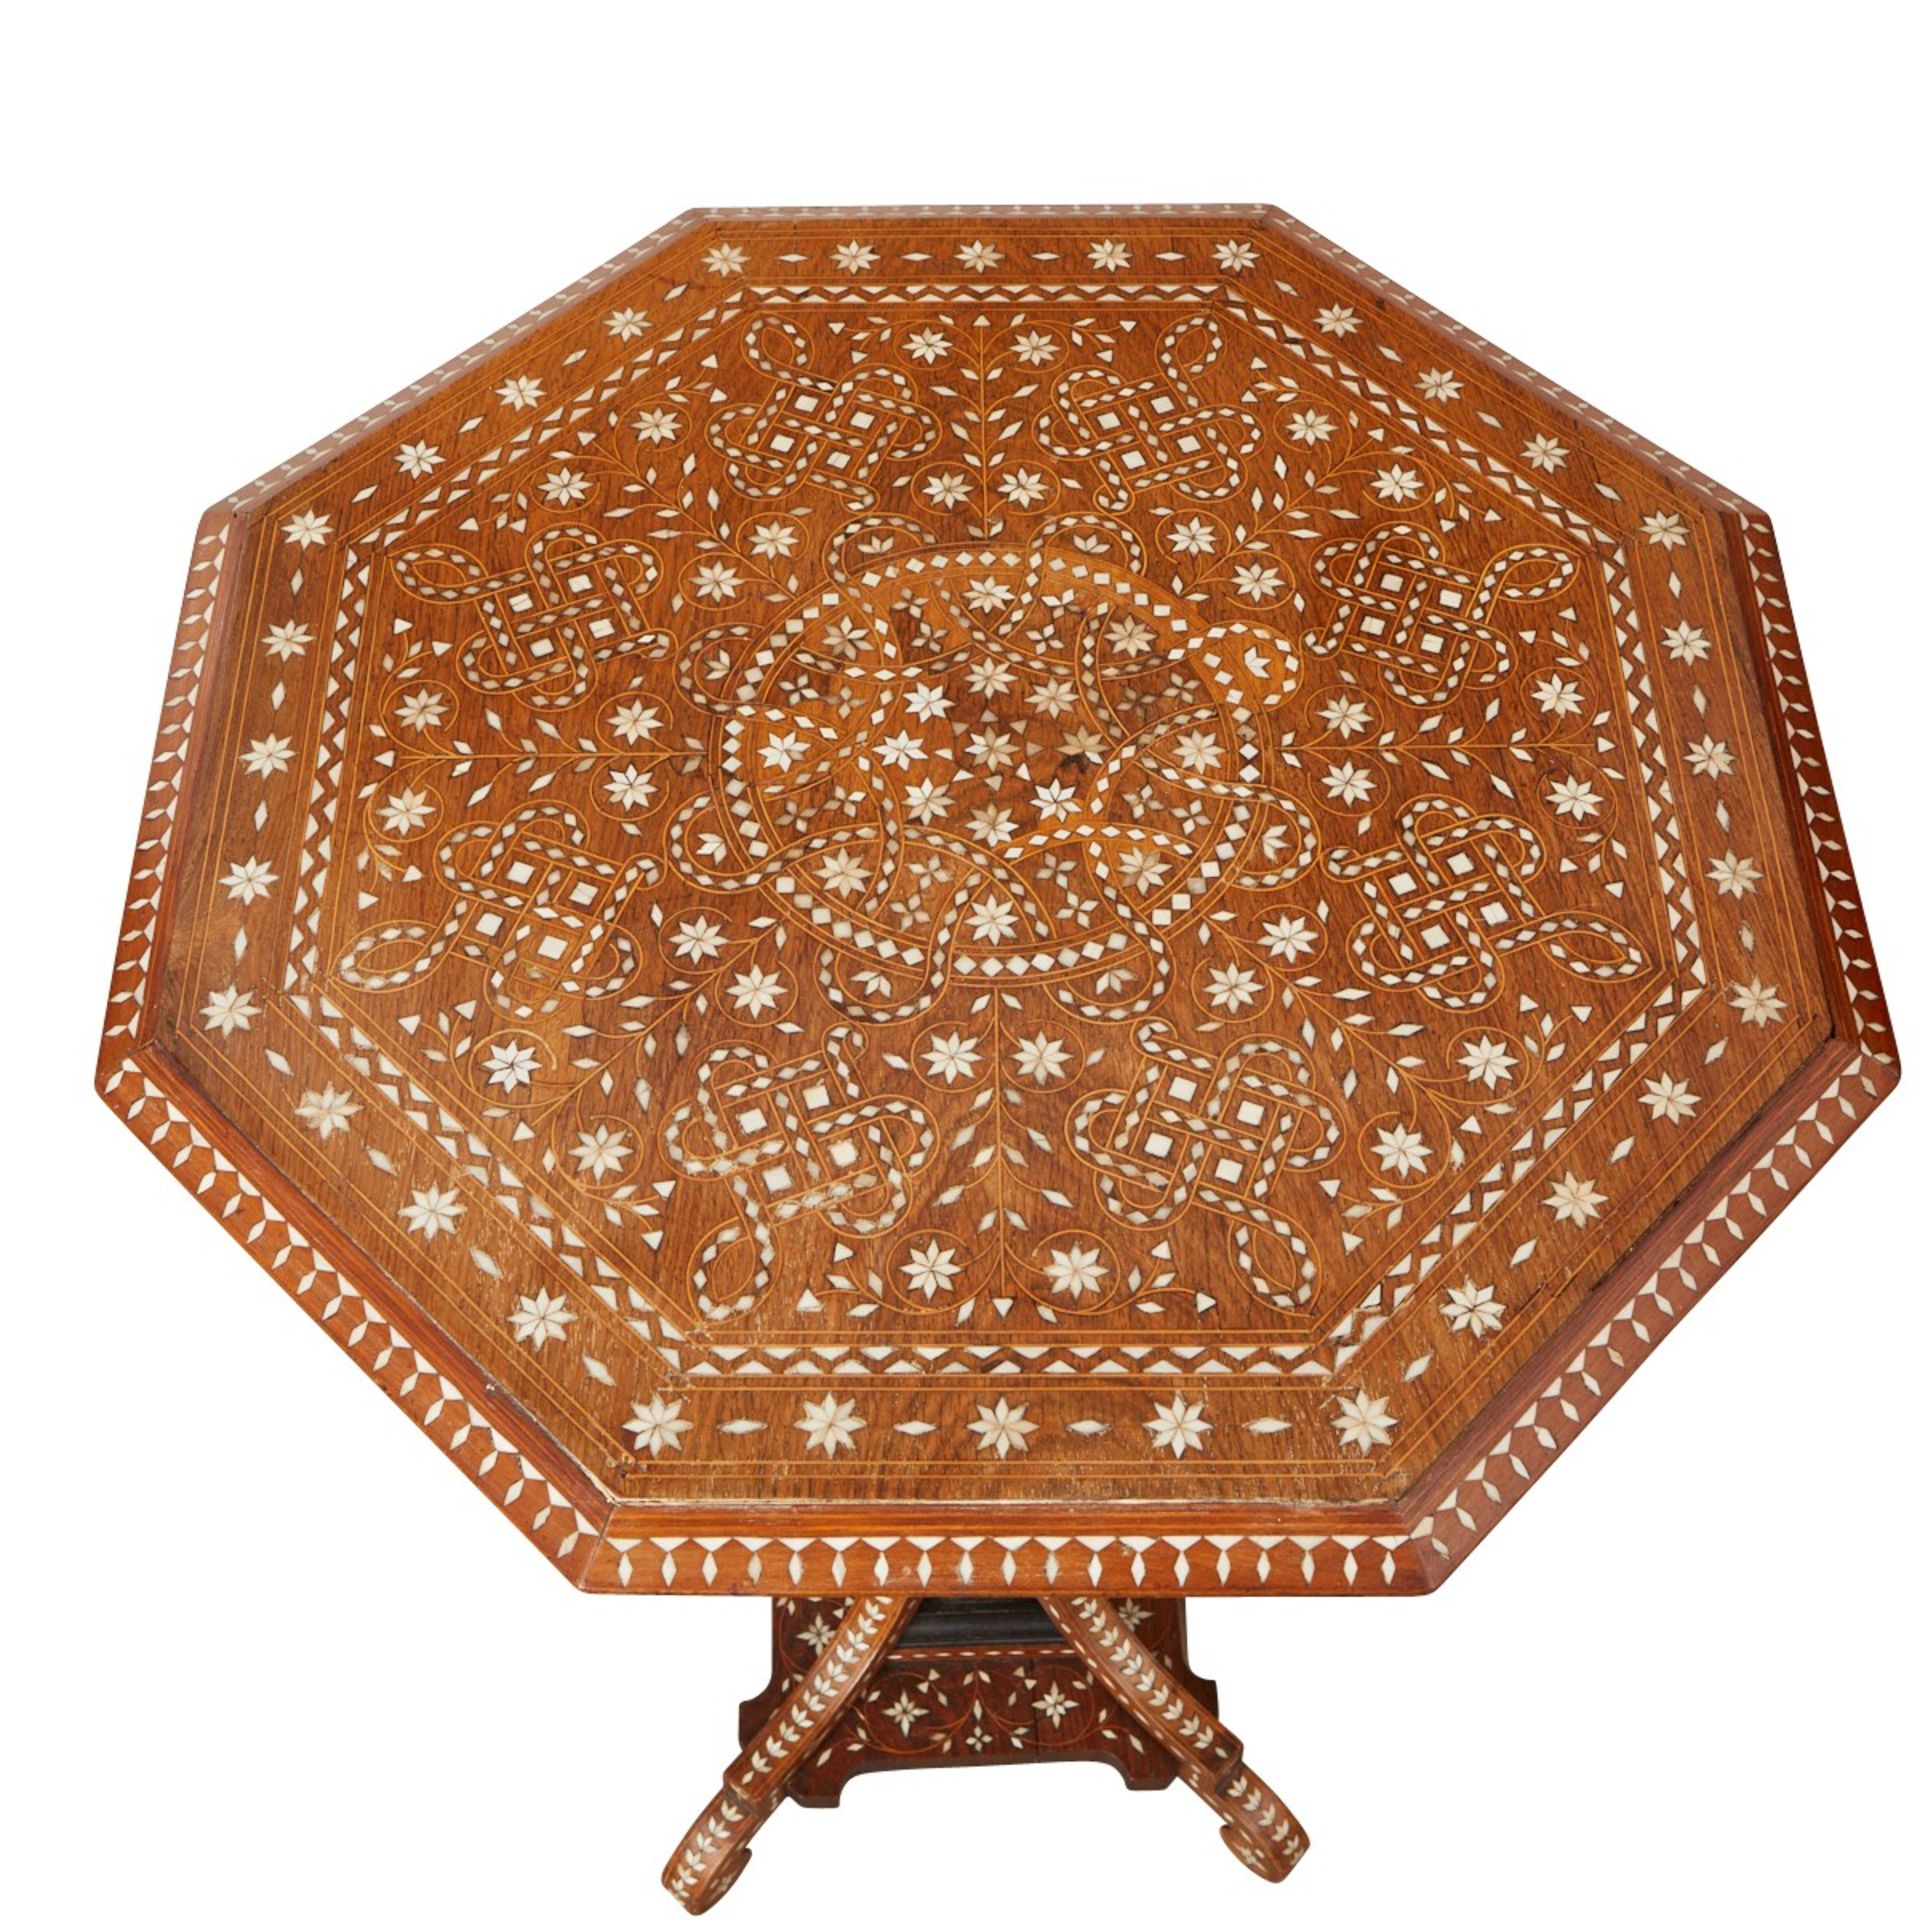 Syrian Mother of Pearl Octagonal Side Table - Image 2 of 8